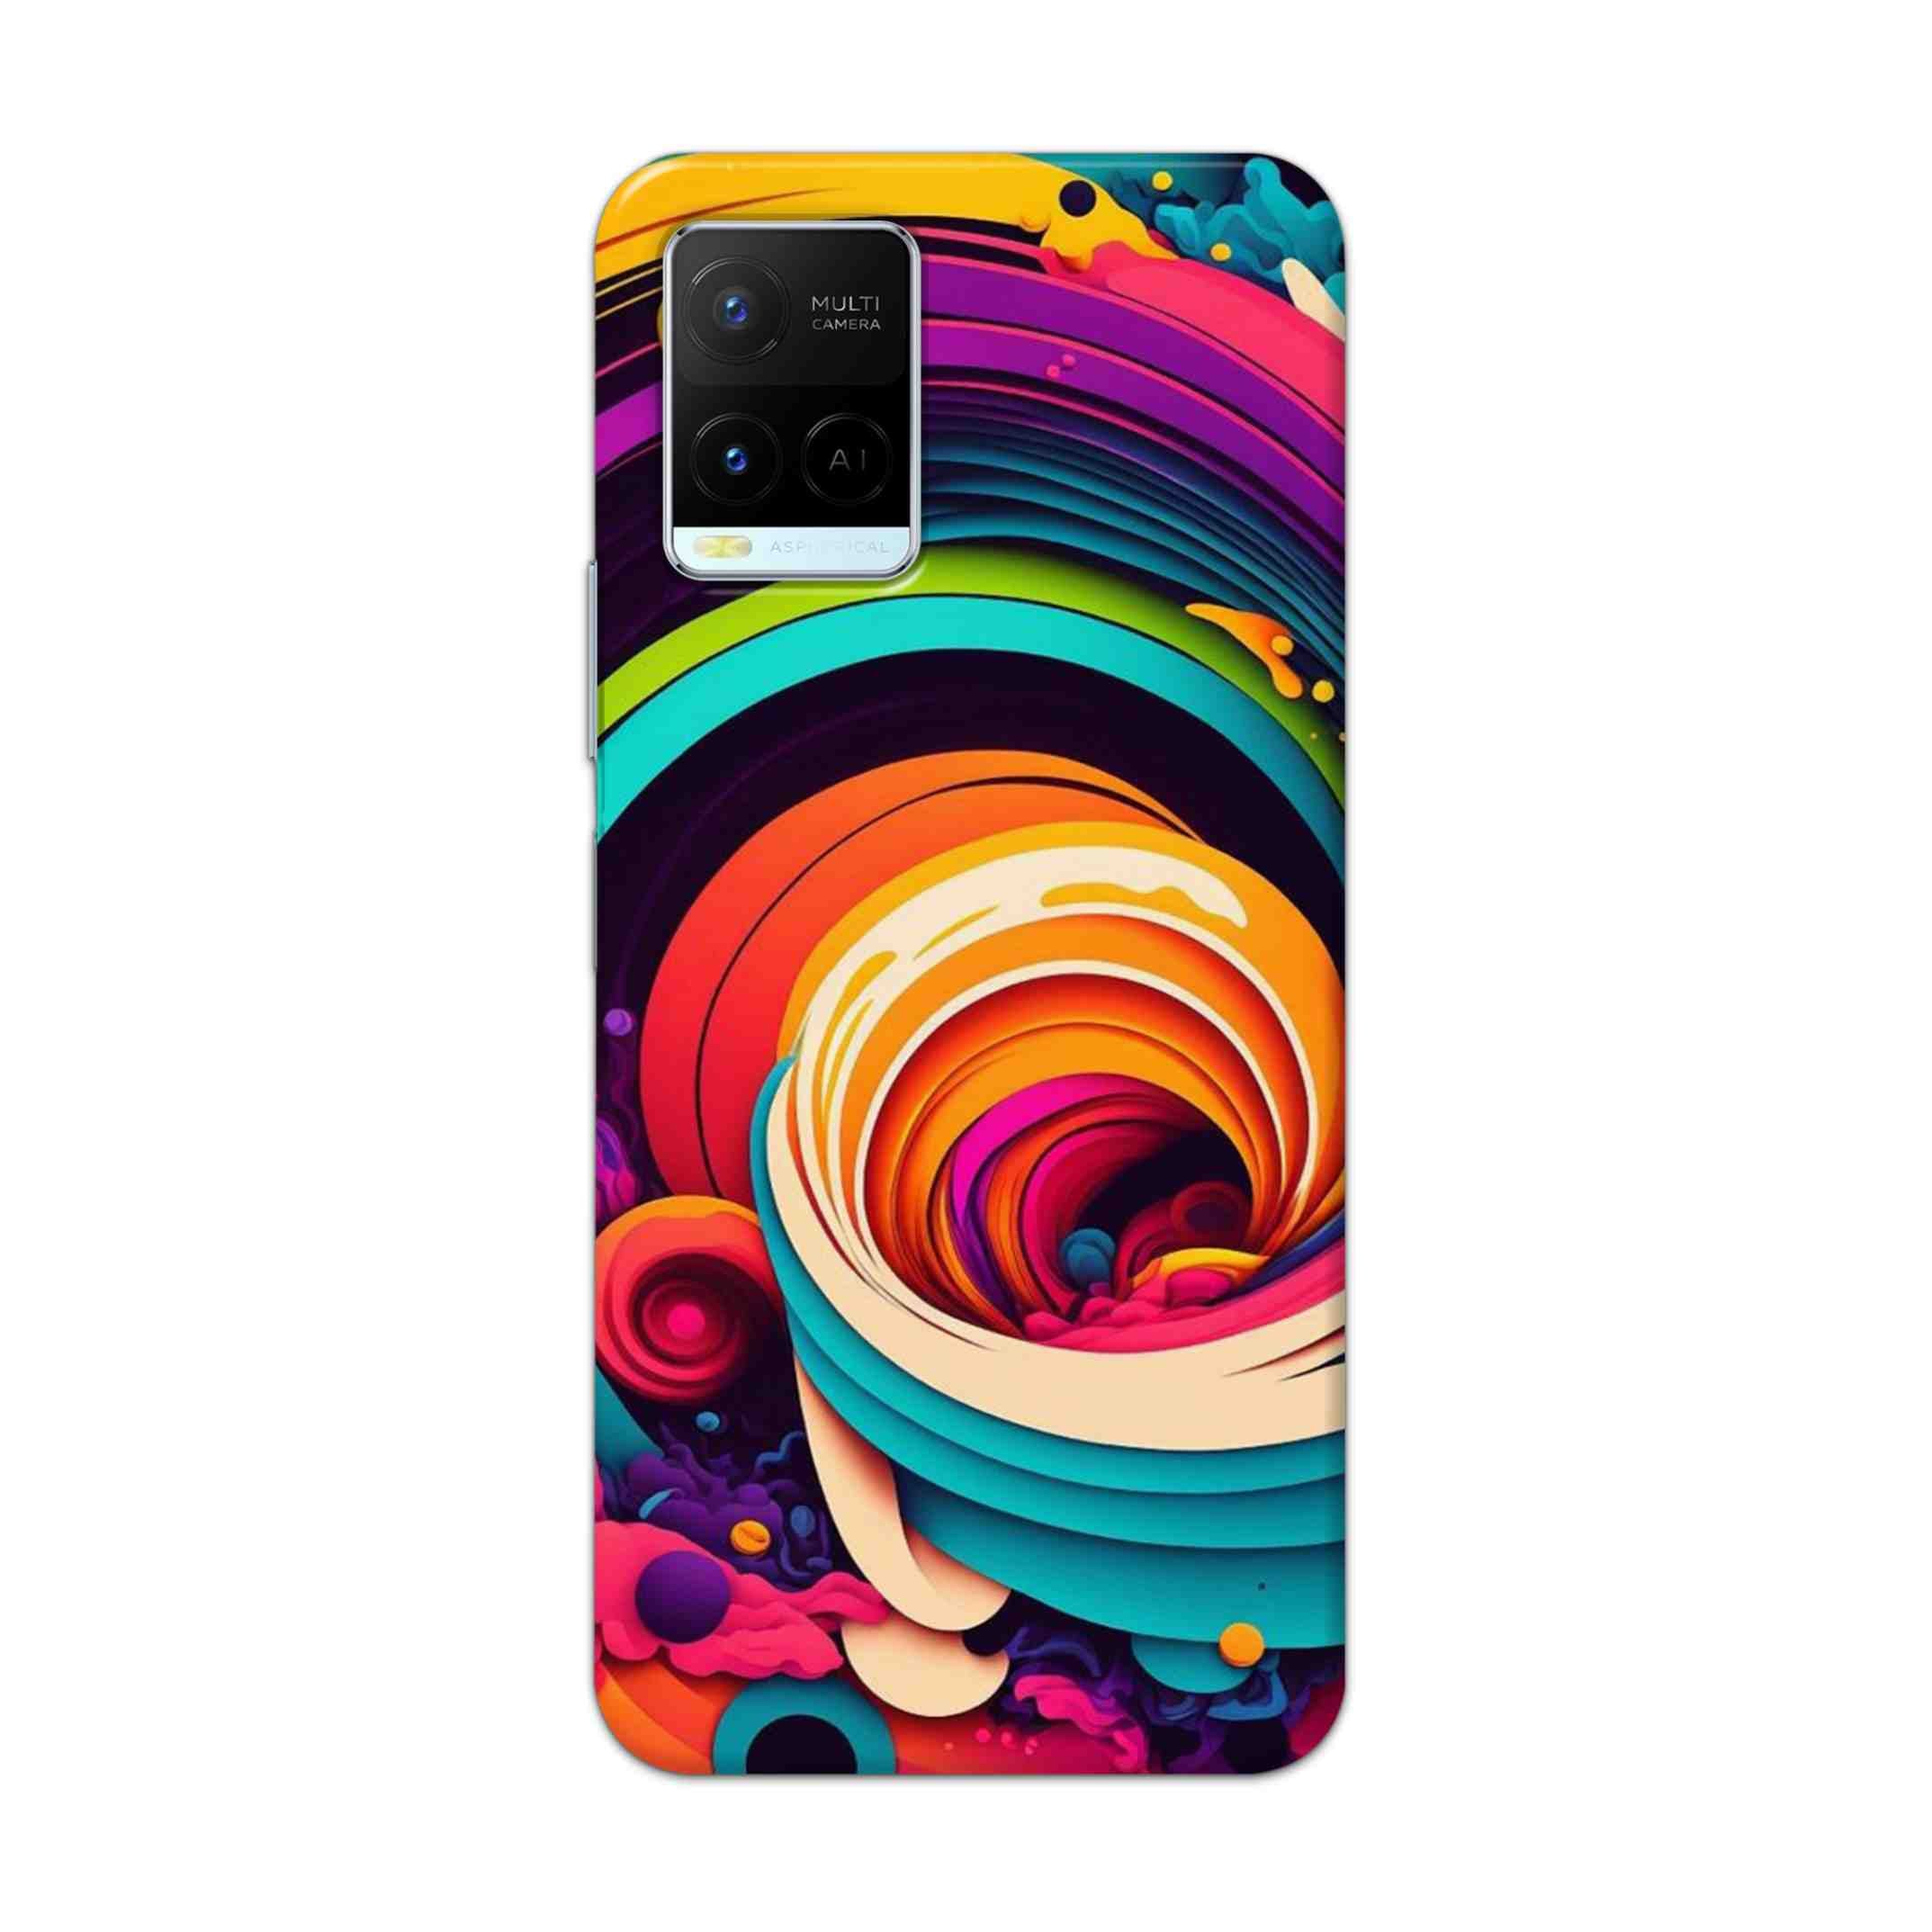 Buy Colour Circle Hard Back Mobile Phone Case Cover For Vivo Y21 2021 Online